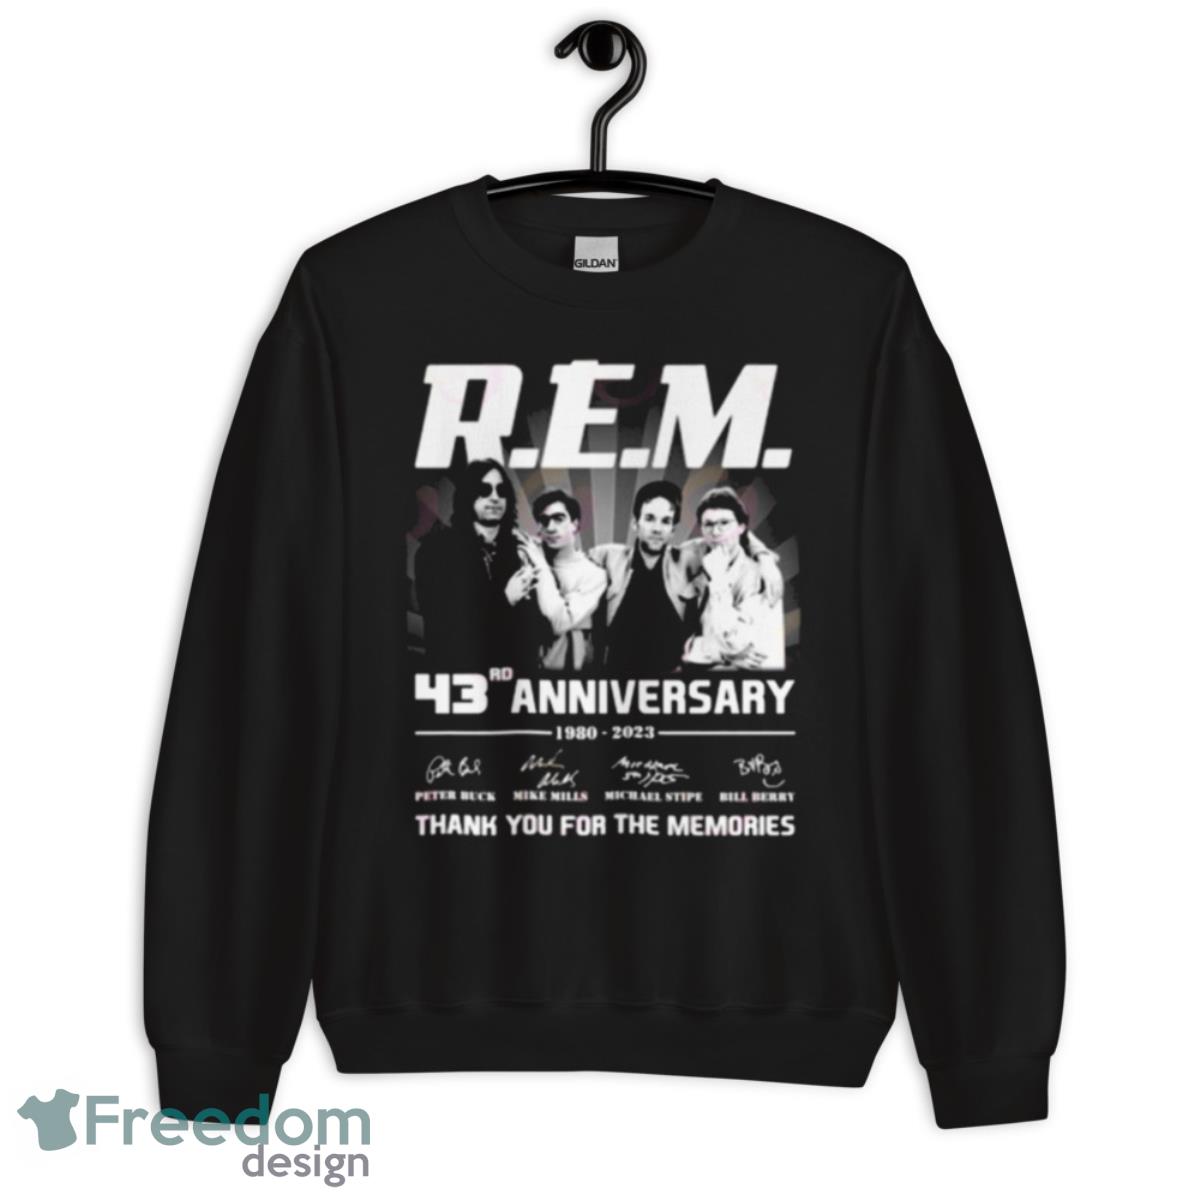 R.E.M. 1 BK 43rd Anniversary 1980 – 2023 Thank You For The Memories Signatures Shirt